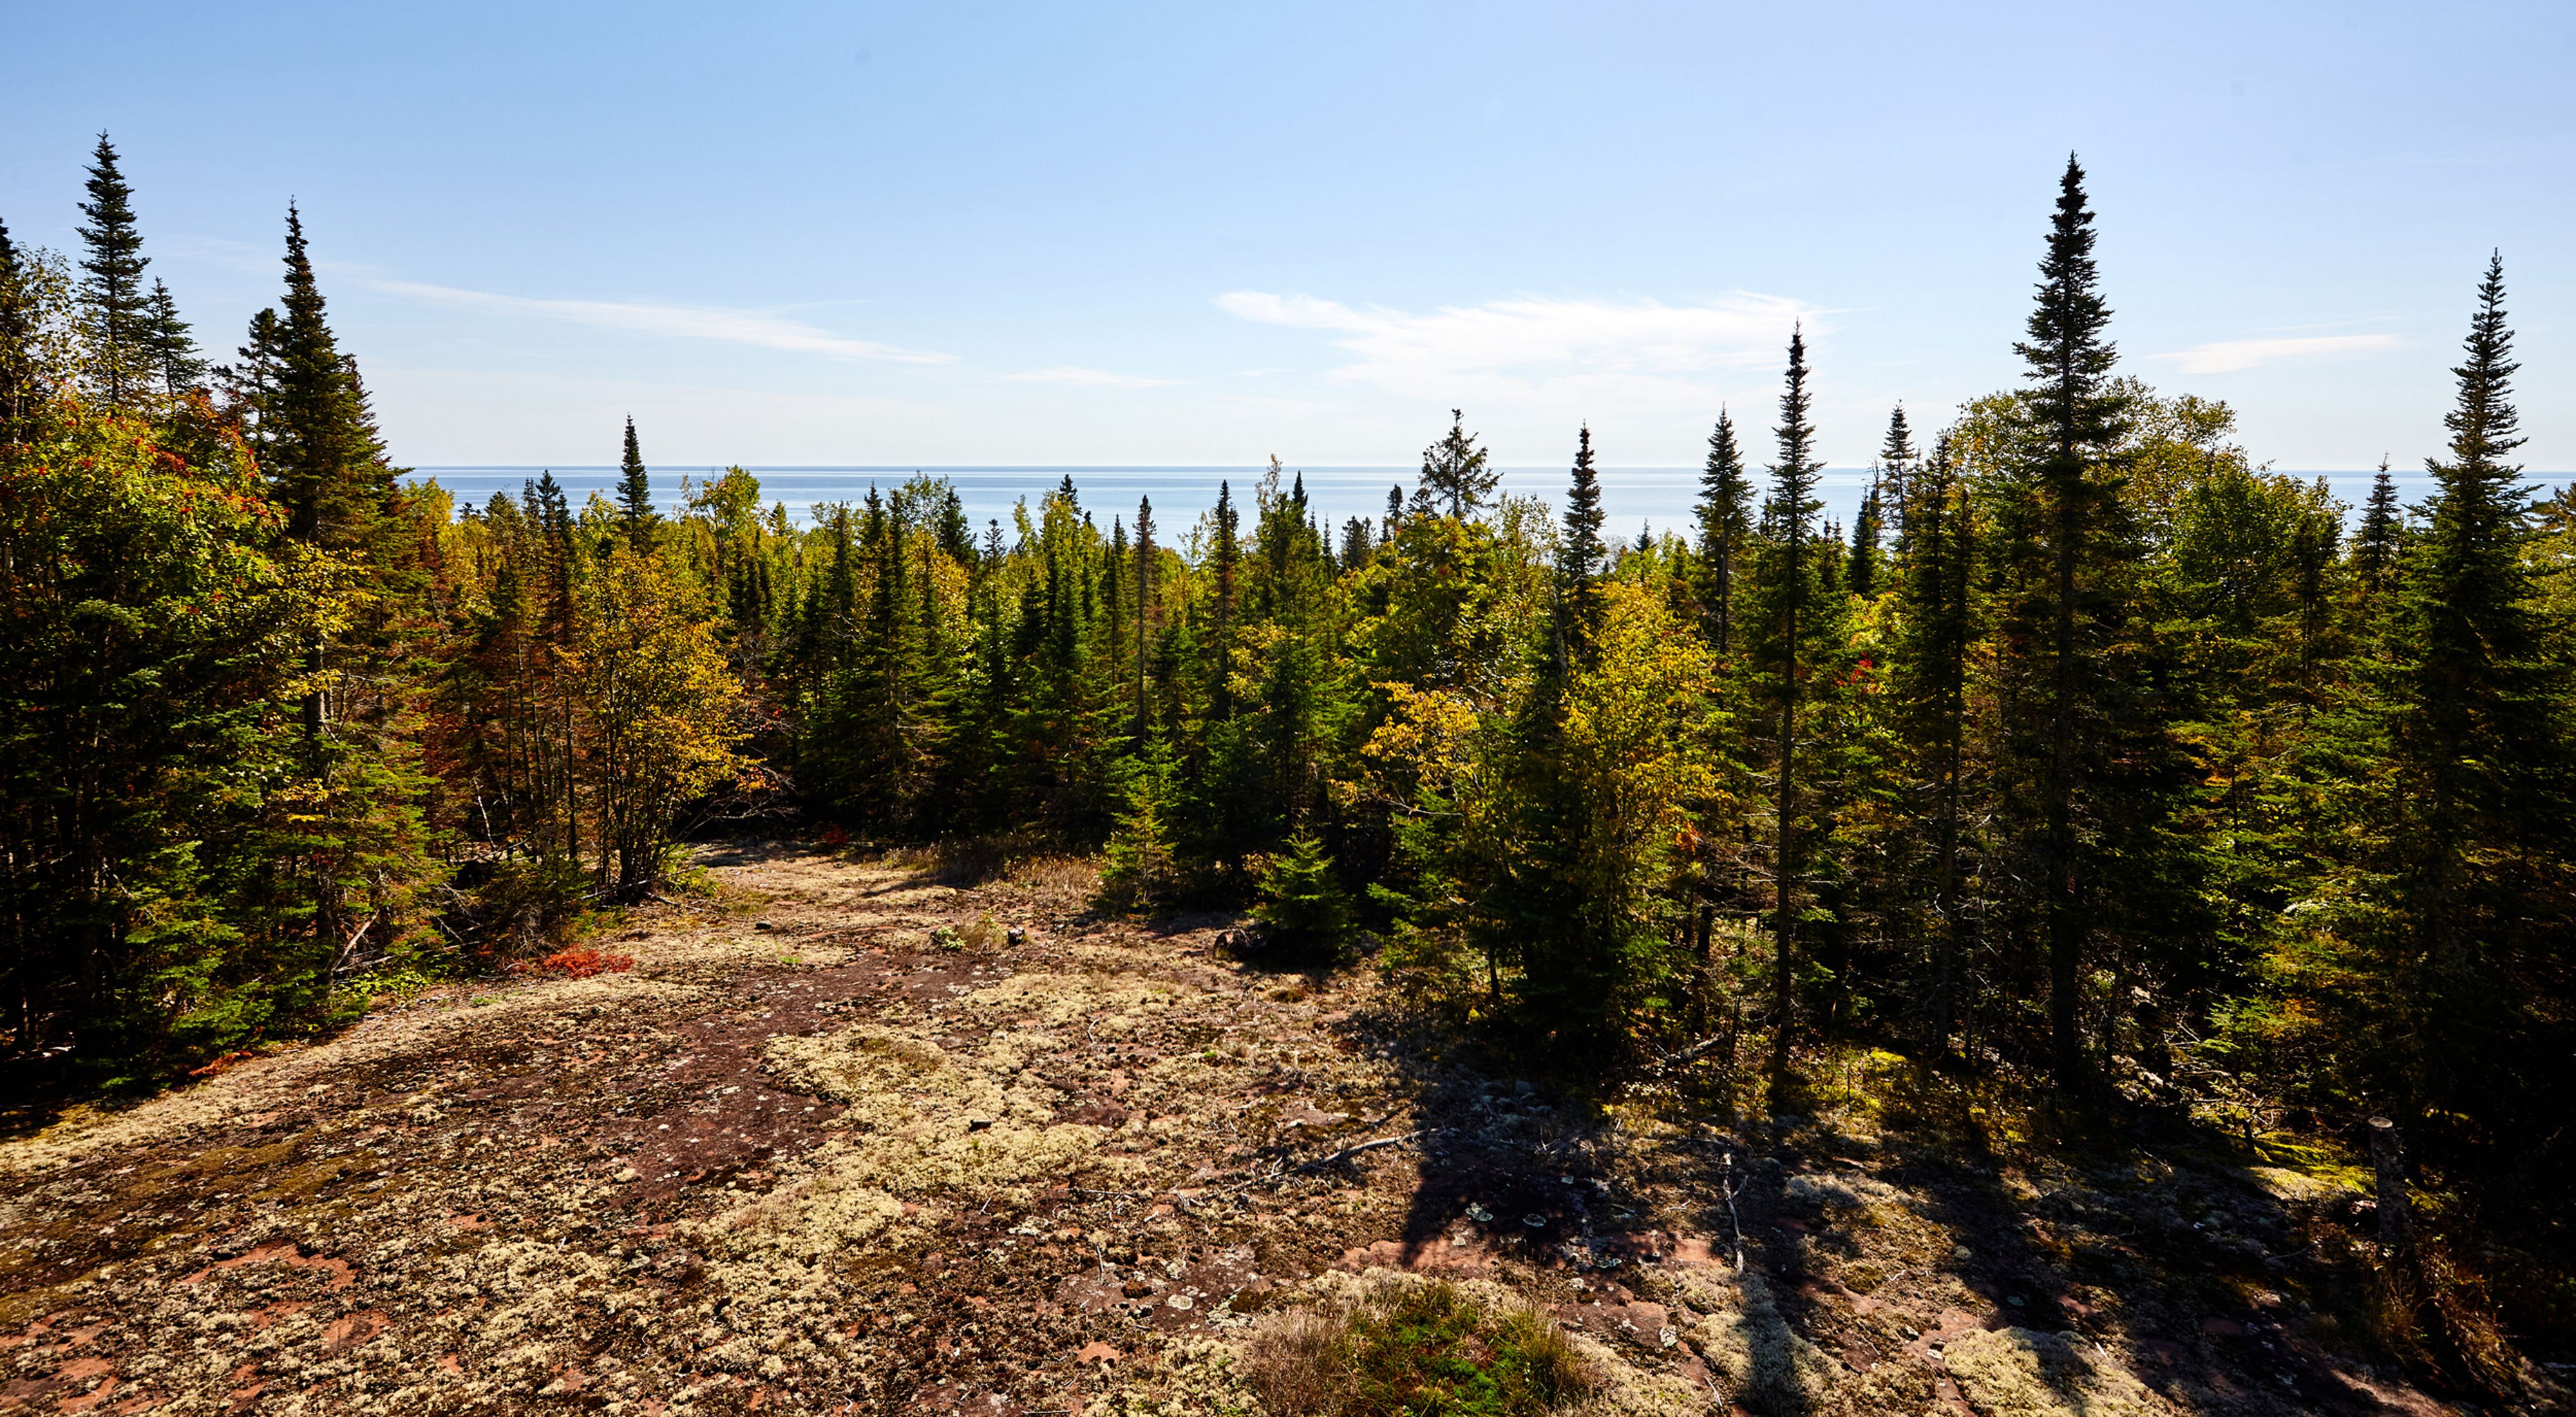 North Shore forest along Lake Superior.